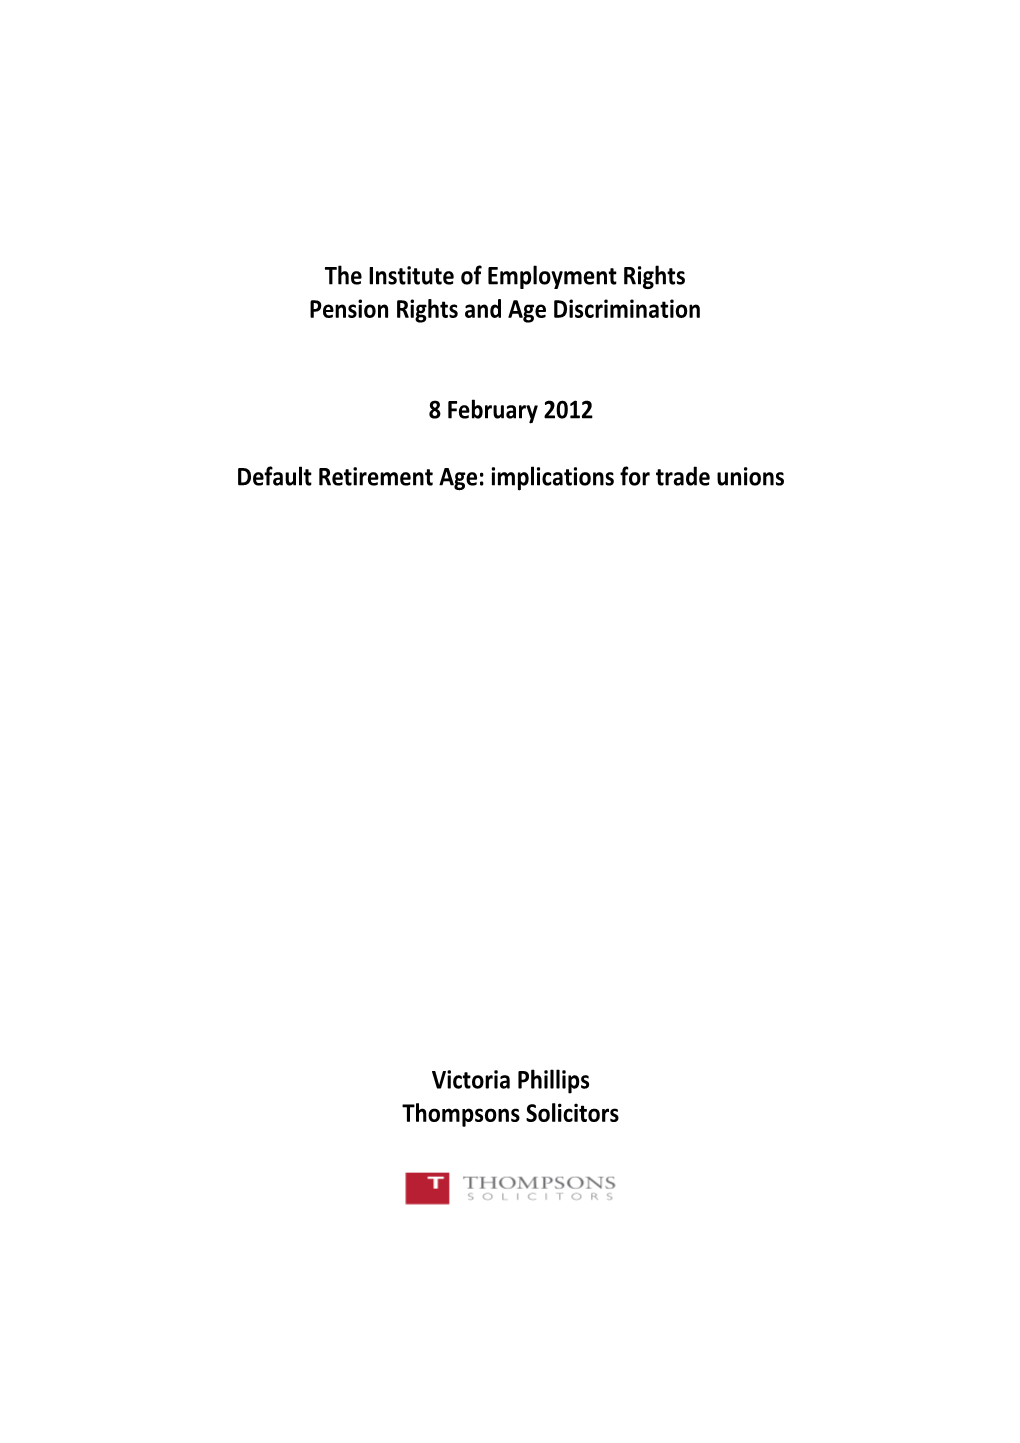 The Institute of Employment Rights